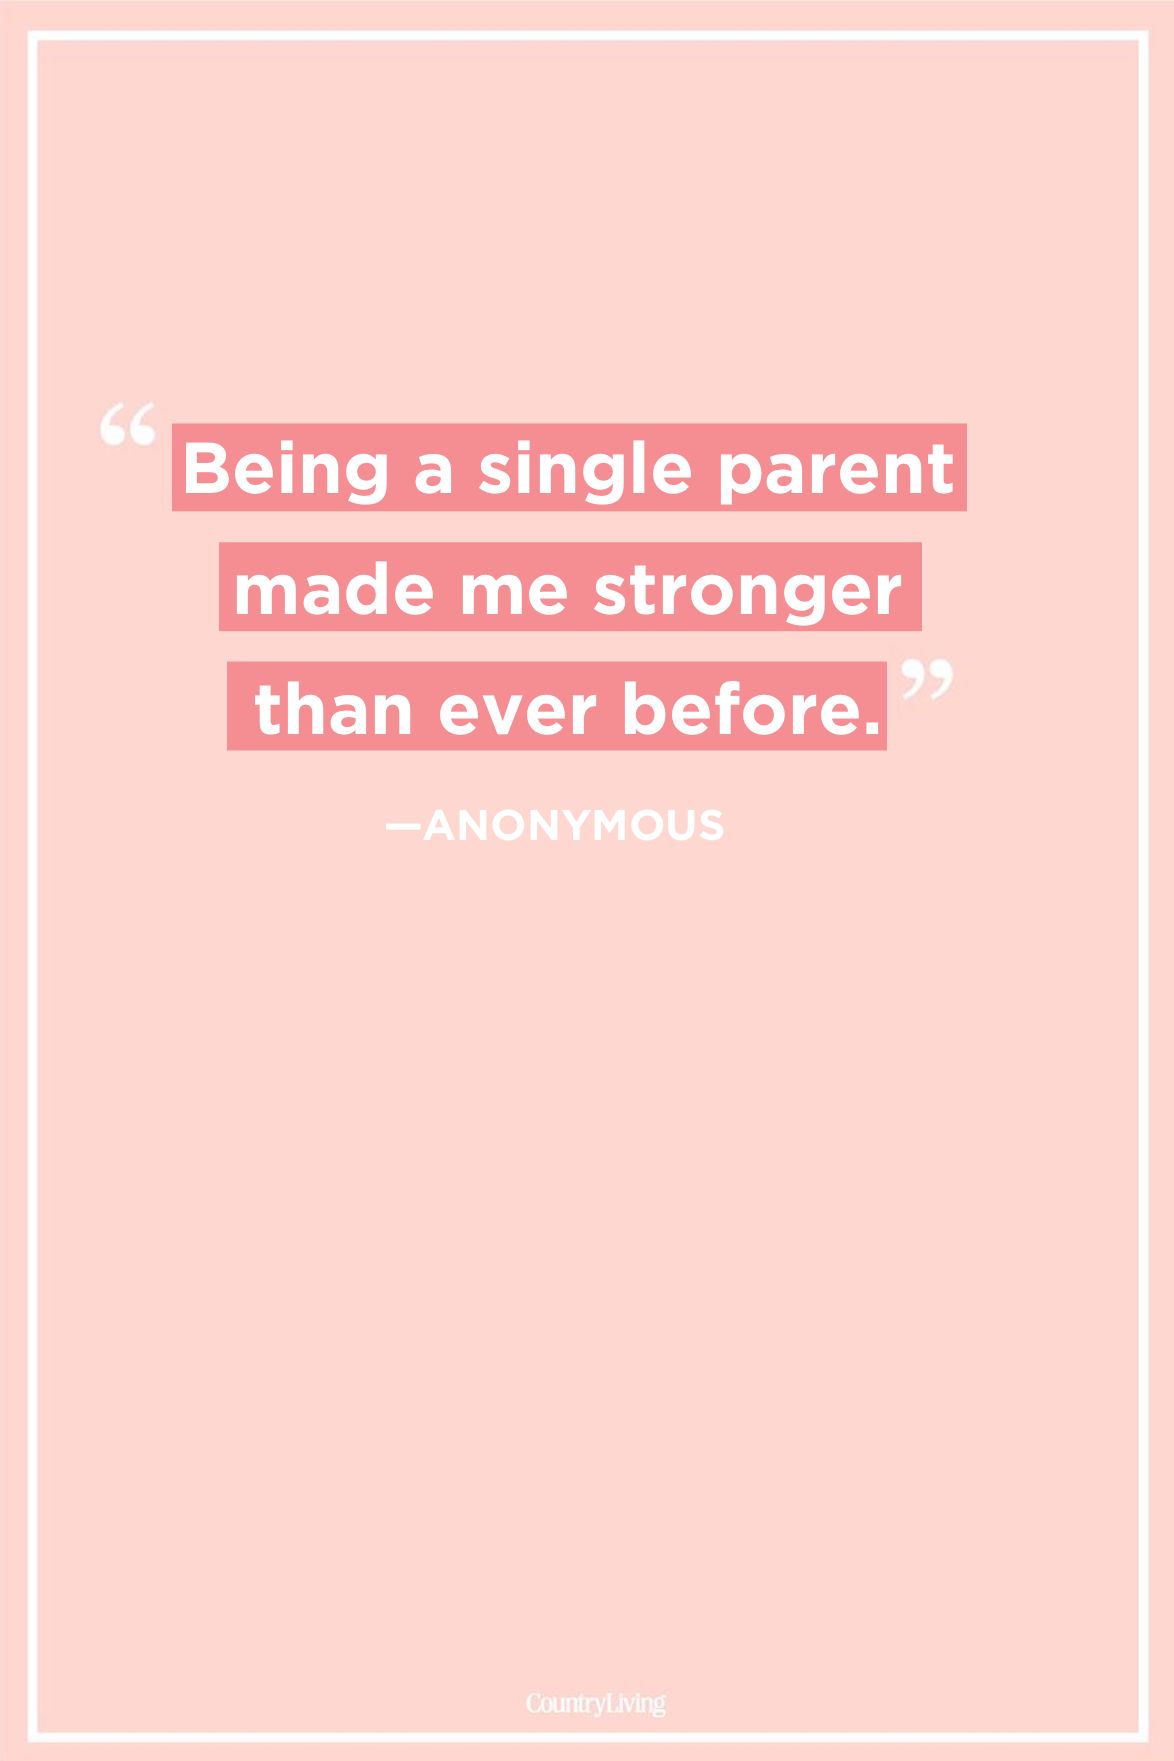 single mother quotes and sayings